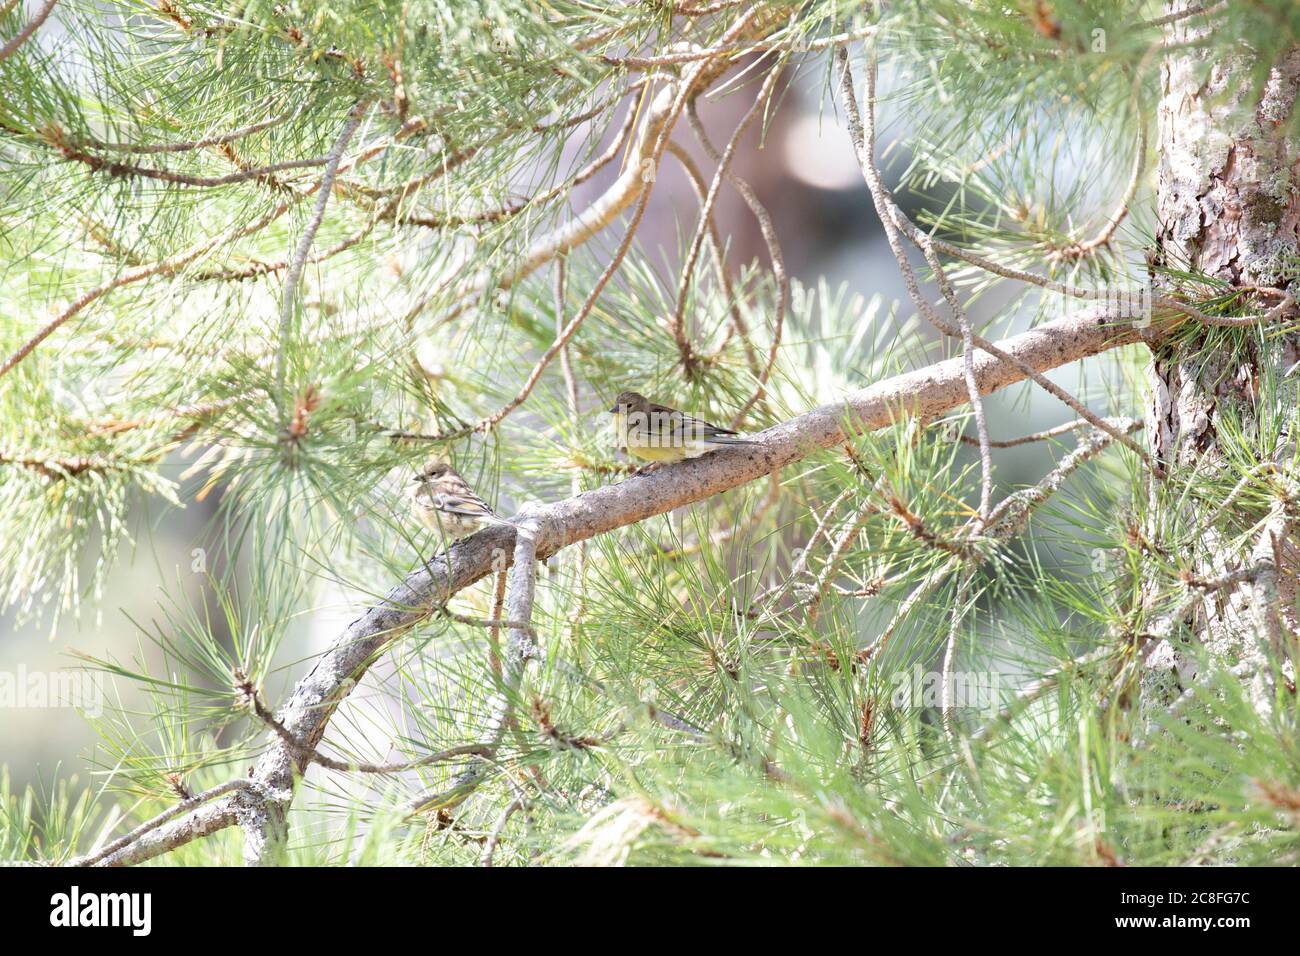 Corsican finch, Corsican citril finch, Mediterranean citril finch (Carduelis corsicana, Carduelis corsicanus, Serinus corsicana), two Corsican finches sitting on branch in a pine tree in mountain forest, France, Corsica Stock Photo